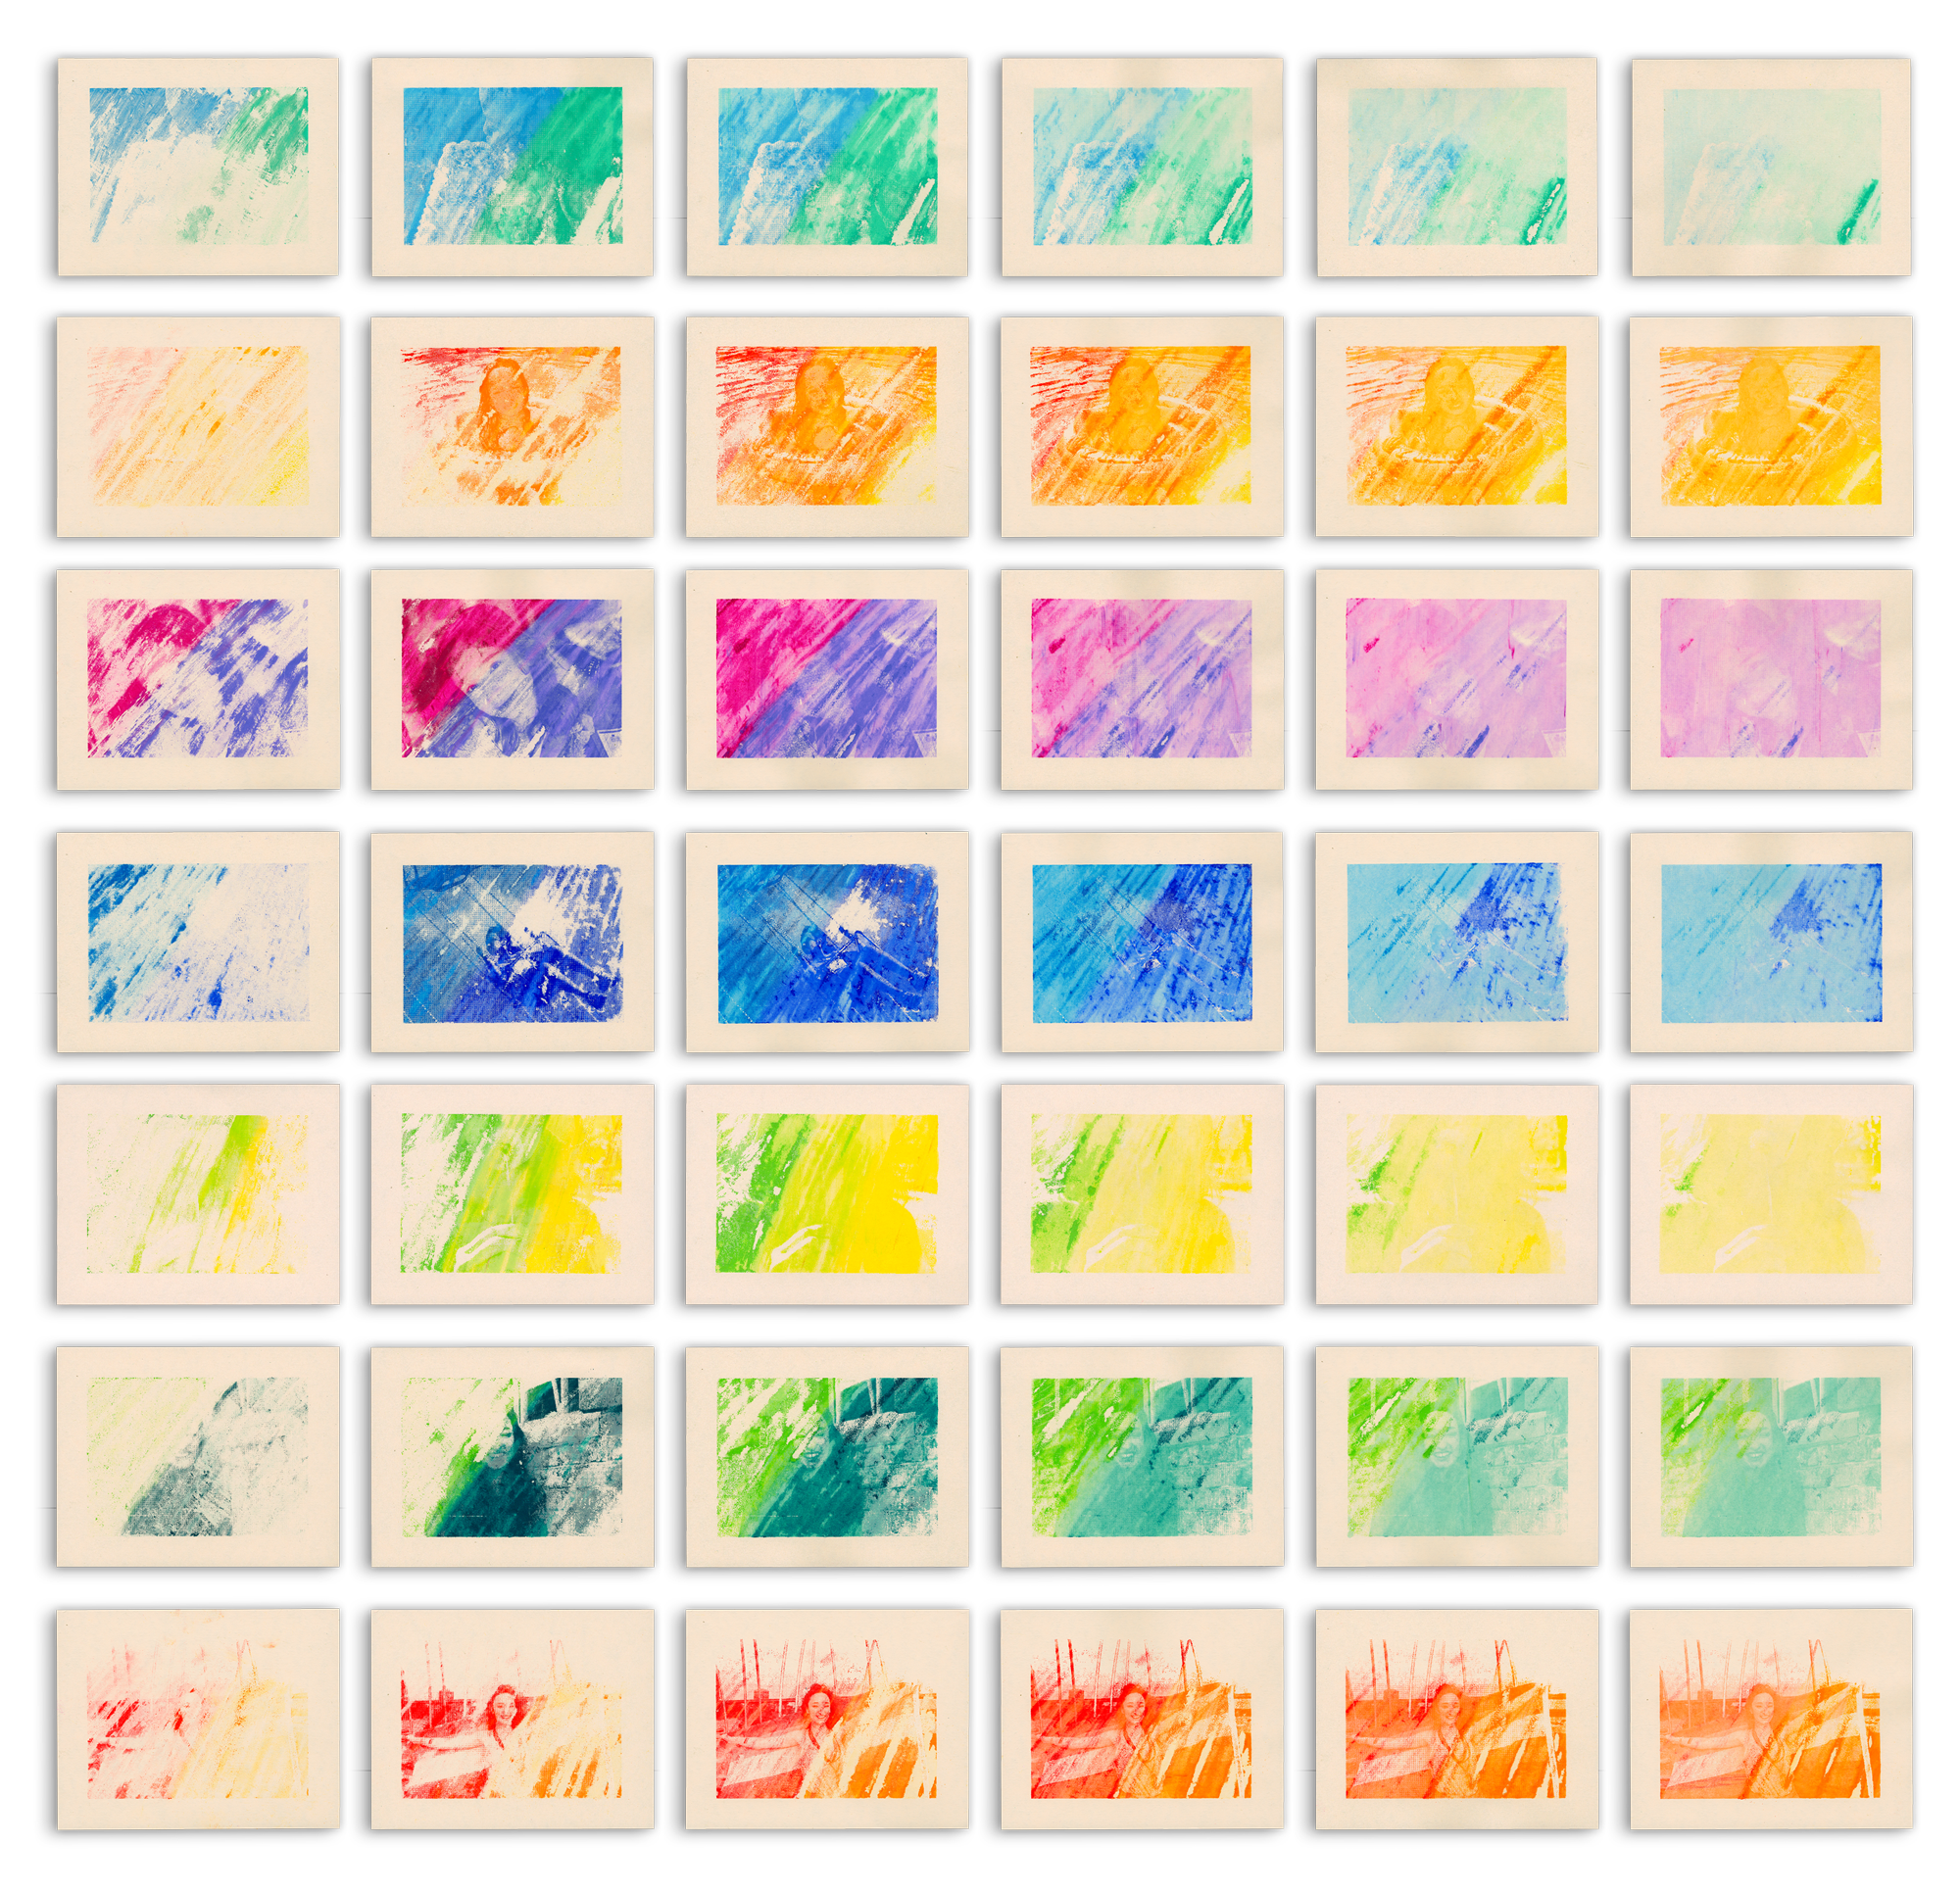 A grid of 42 colorful monoprints, organized into 6 columns and 7 rows. Down each column are prints of various photographs in multi-colored gradients, arranged in chronological order. Across each row is a series of ghost prints created from the prints on the left. The prints have a slight drop shadow and are on a white background.